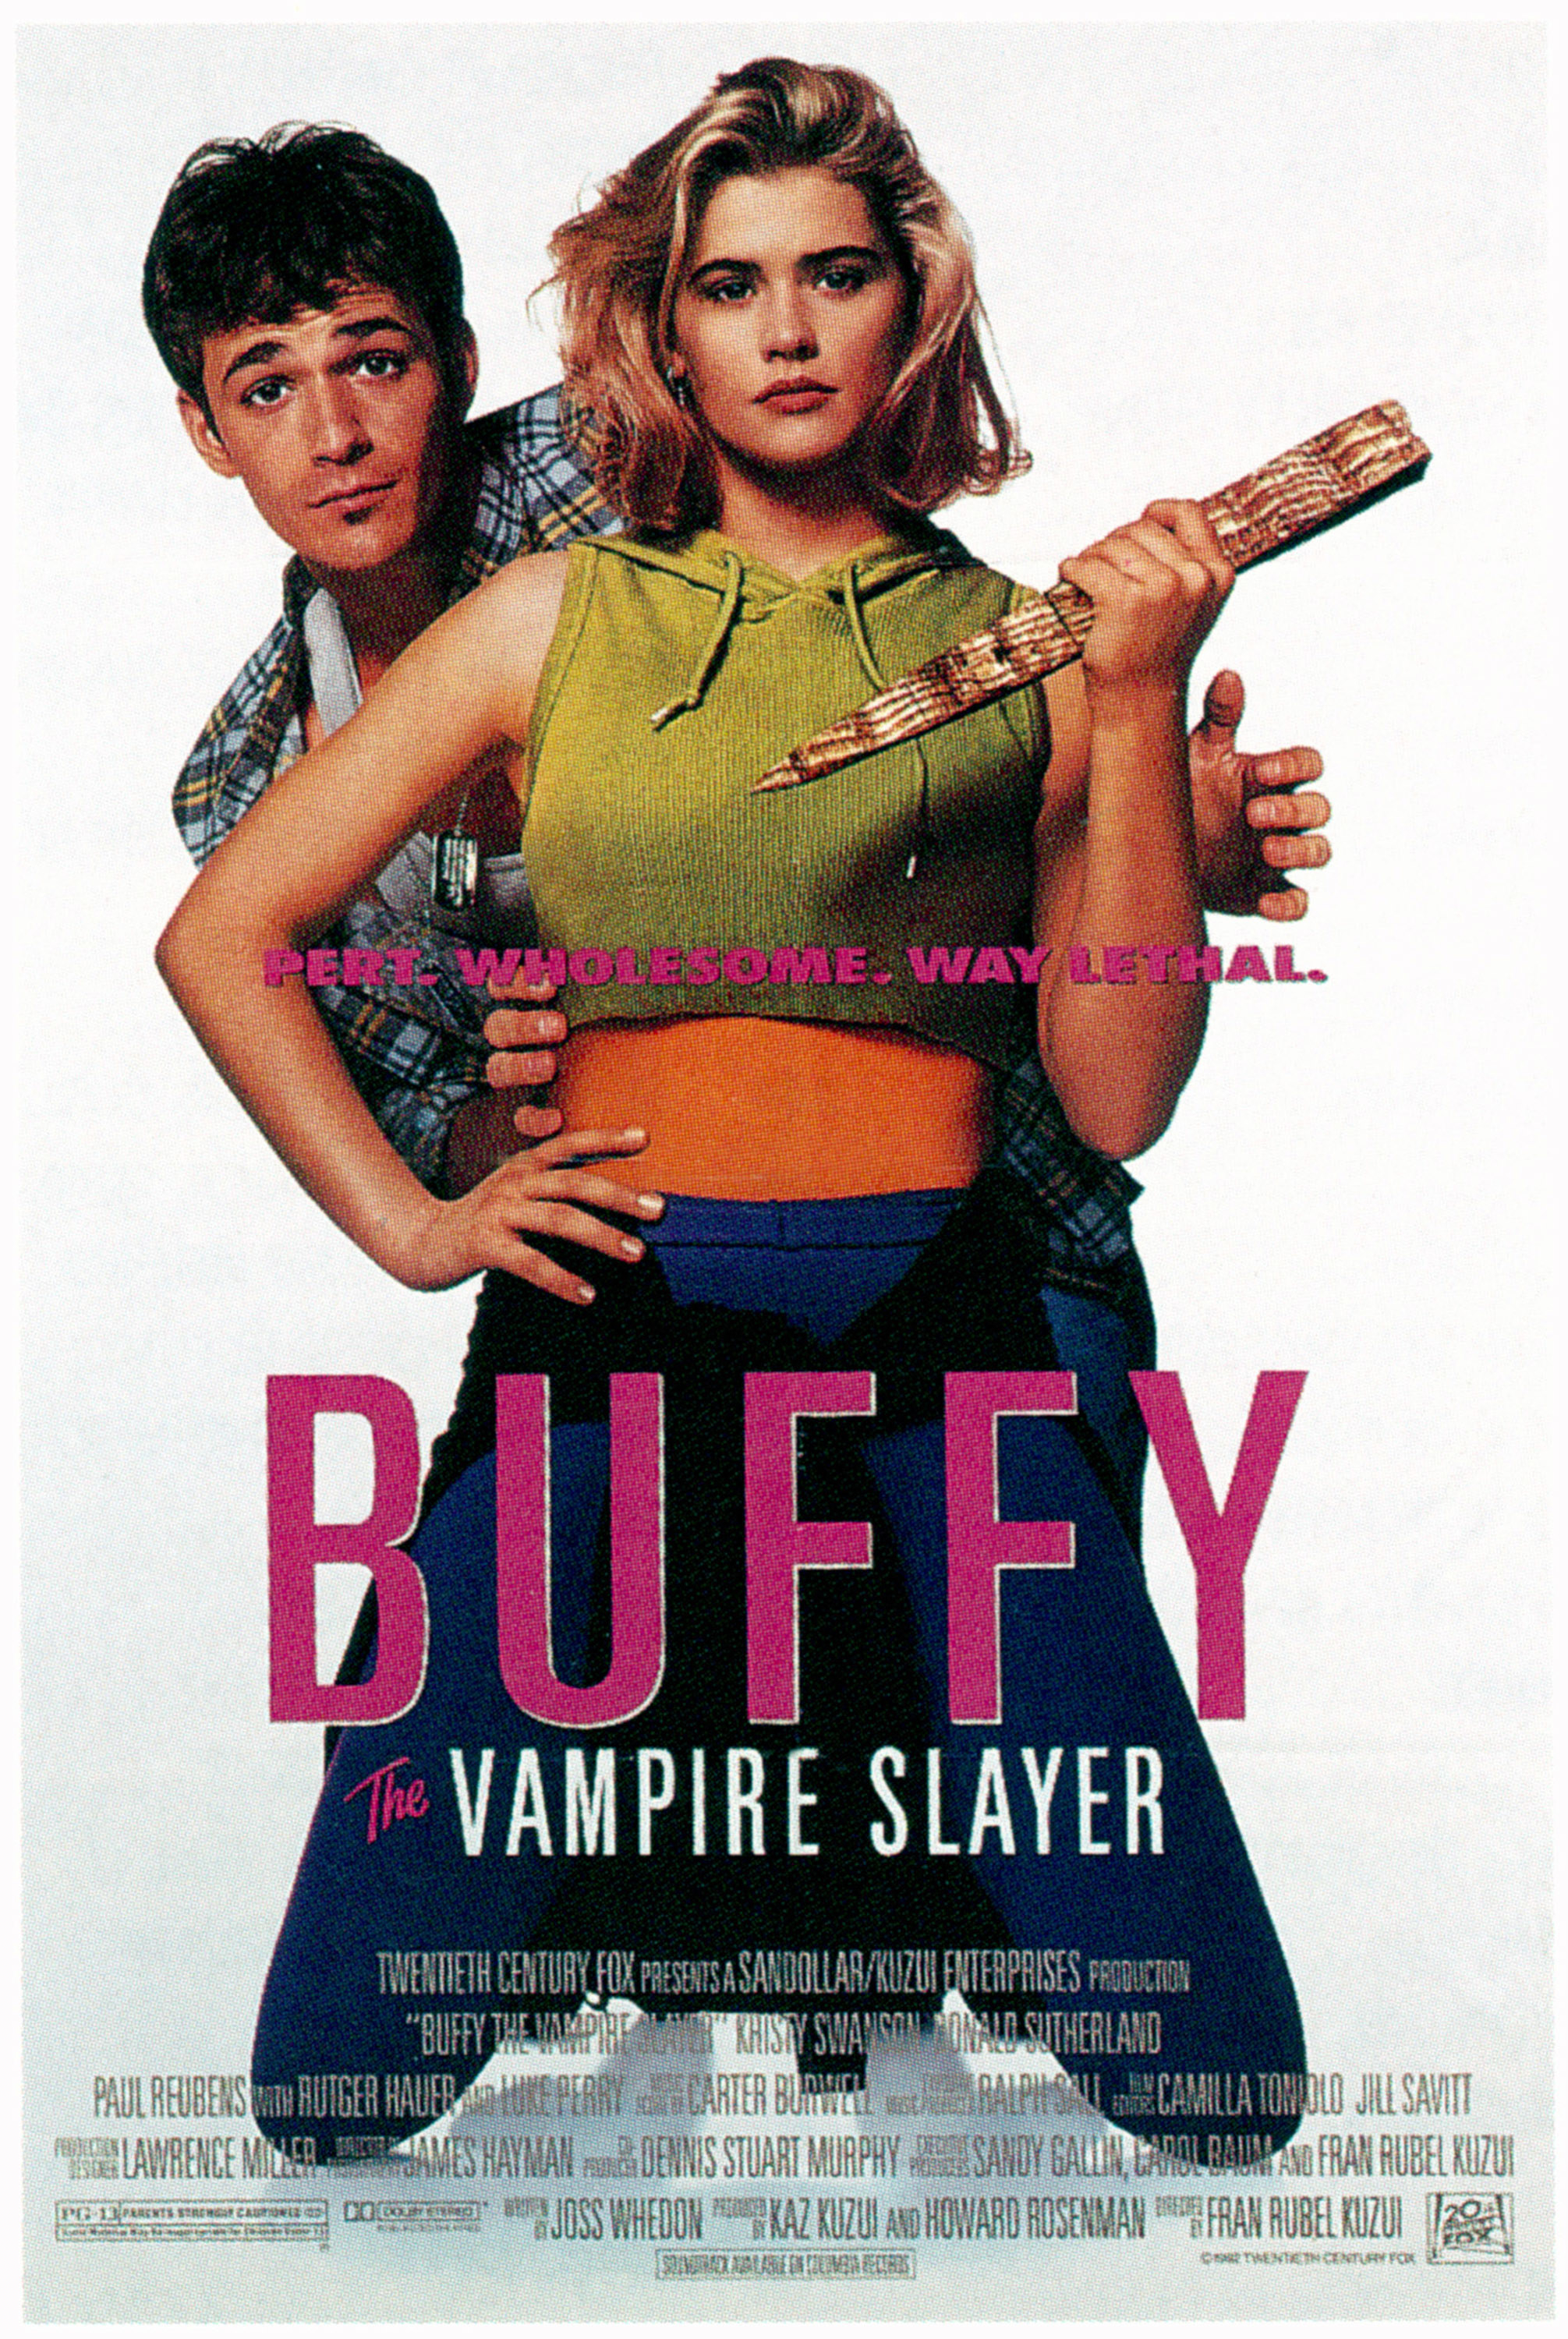 The movie poster for Buffy the Vampire Slayer